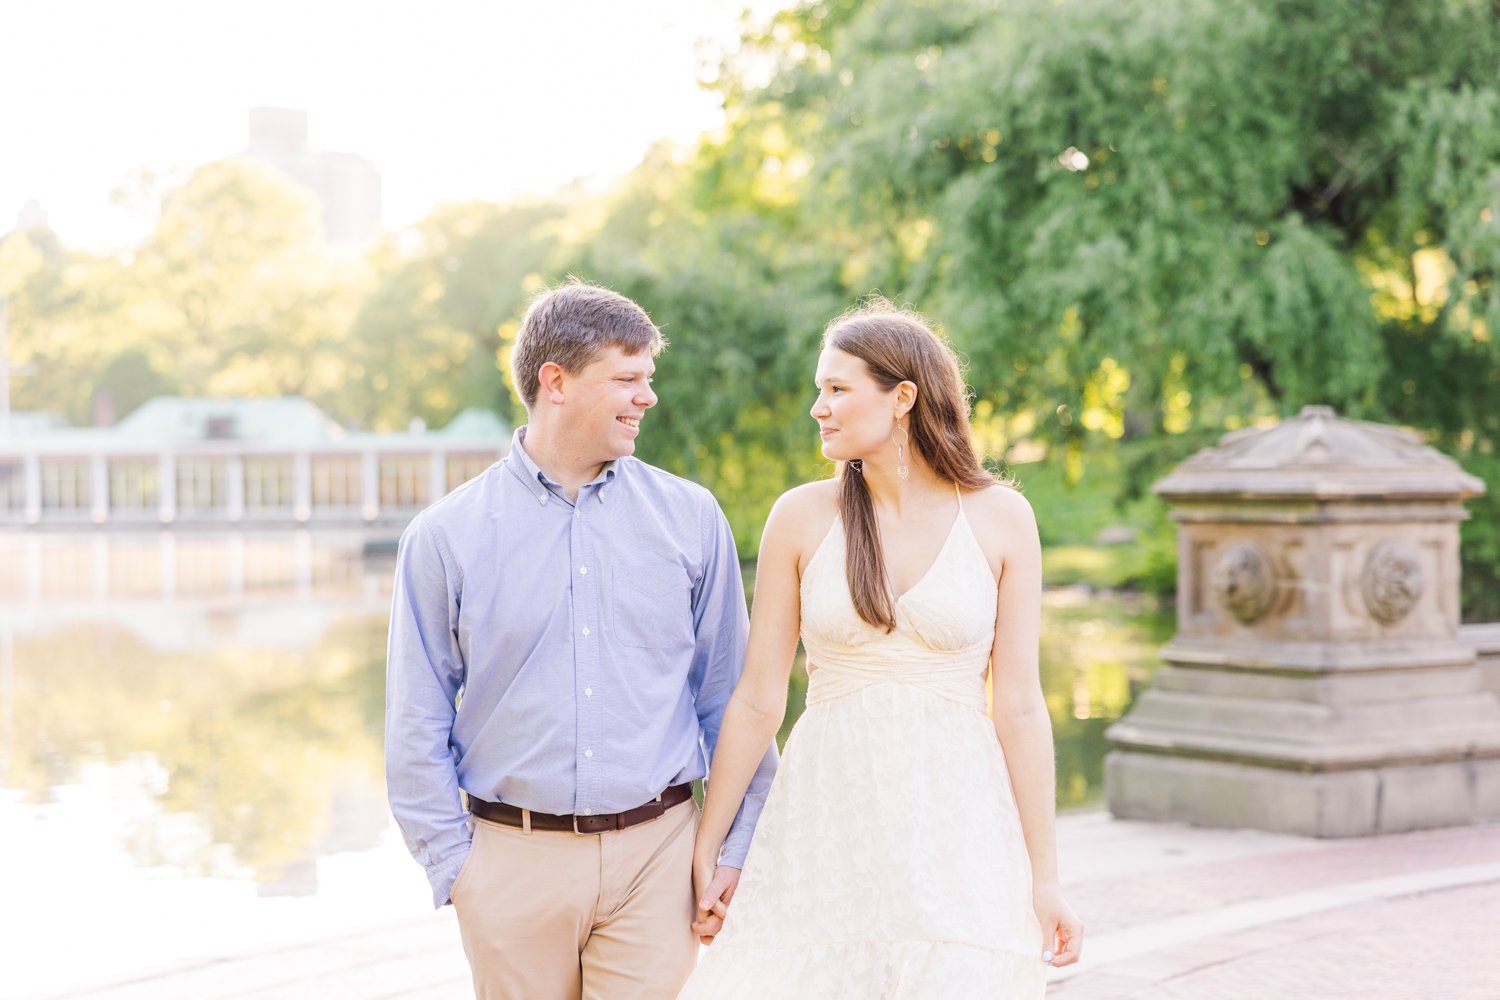 central-park-bethesda-fountain-engagement-session-new-york-nyc-wedding-photographer-shaina-lee-photography